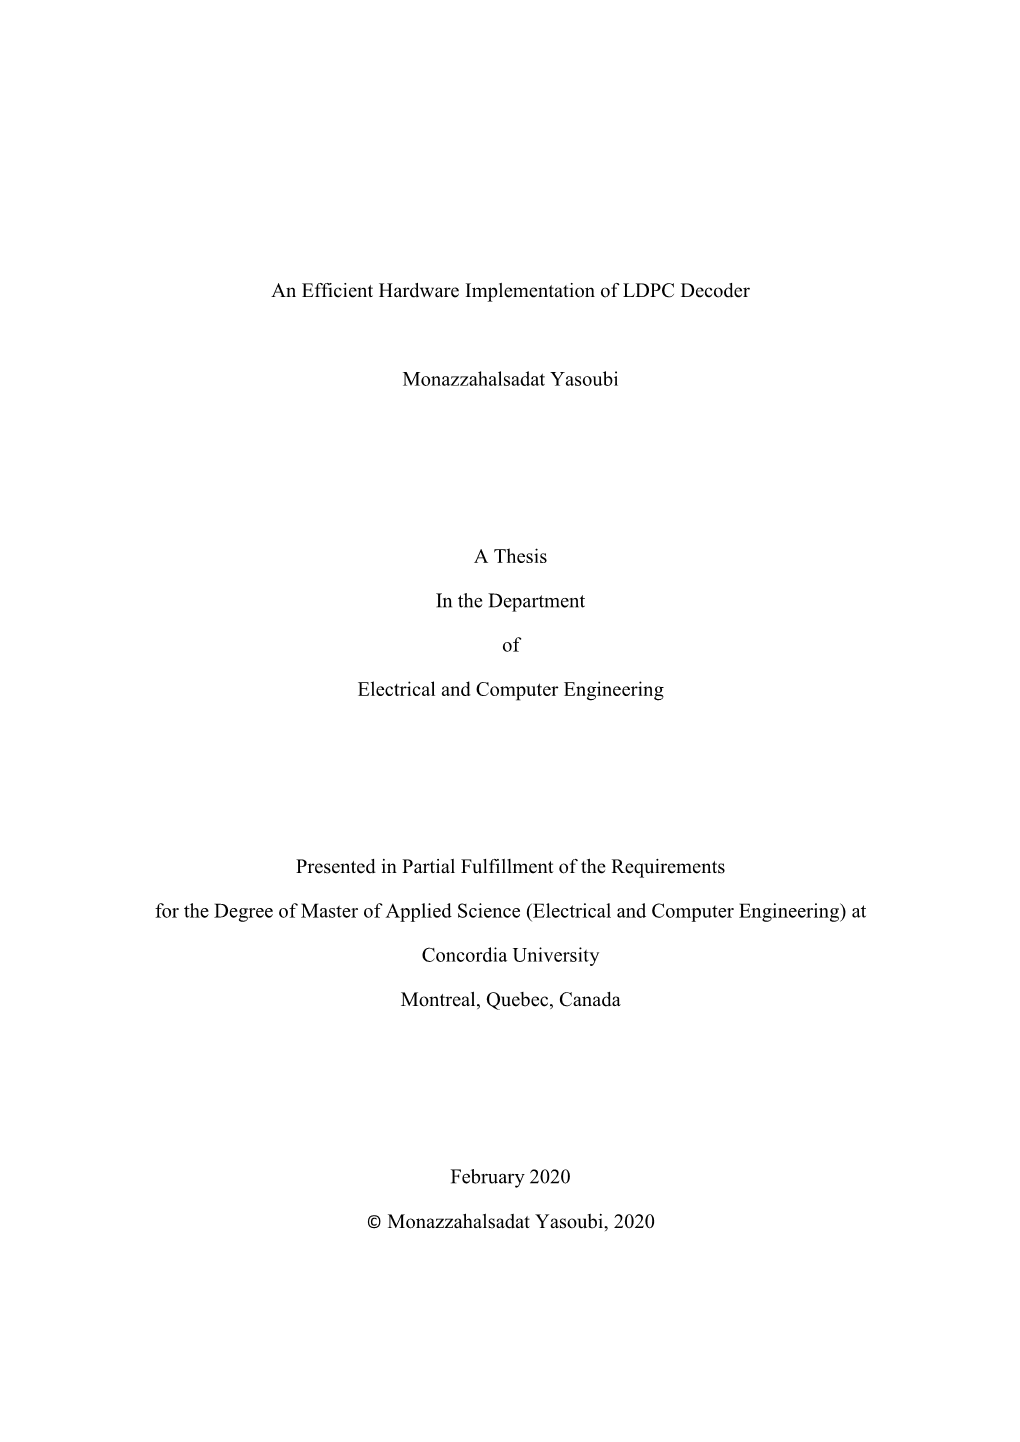 An Efficient Hardware Implementation of LDPC Decoder Monazzahalsadat Yasoubi a Thesis in the Department of Electrical and Comput